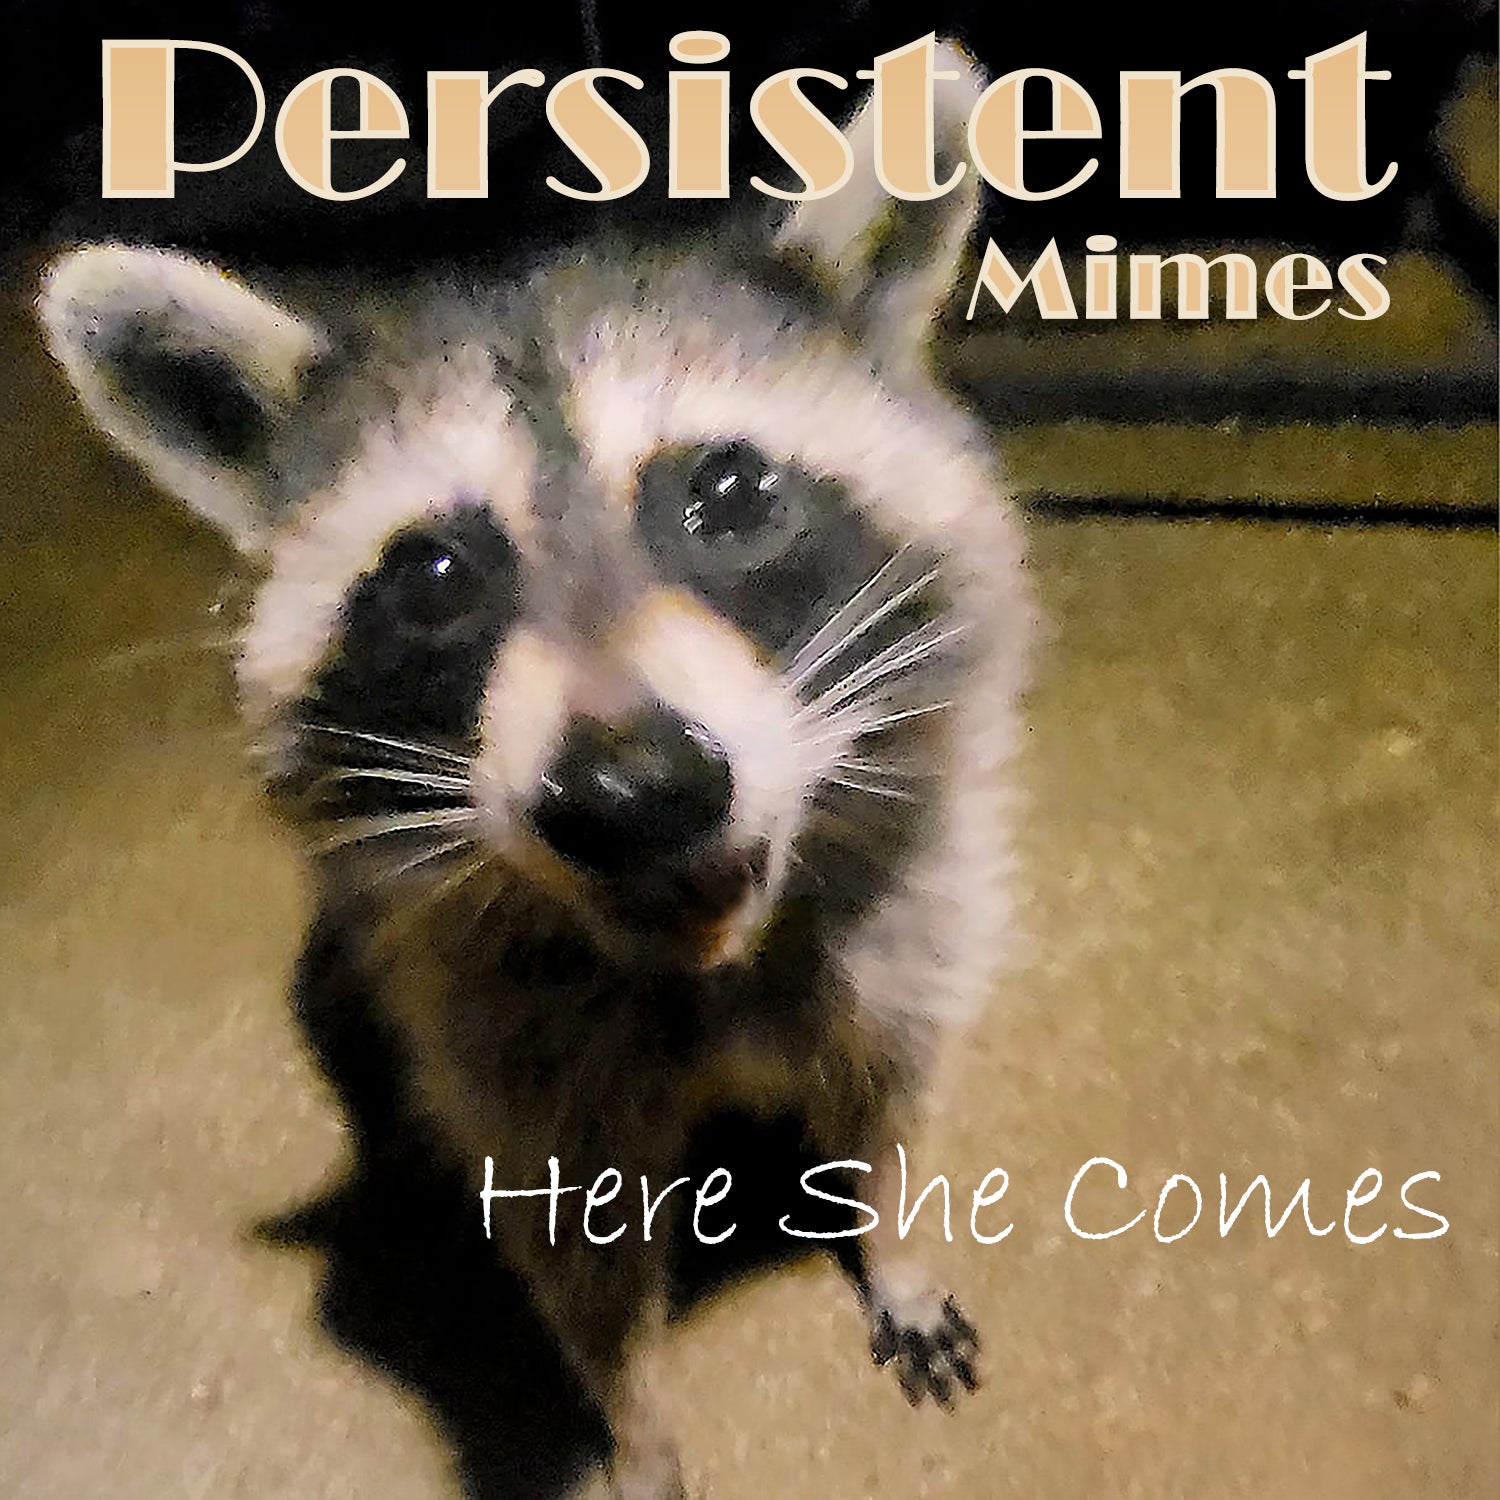 Ohio’s Persistent Mimes Make Their Debut With ‘Here She Comes’